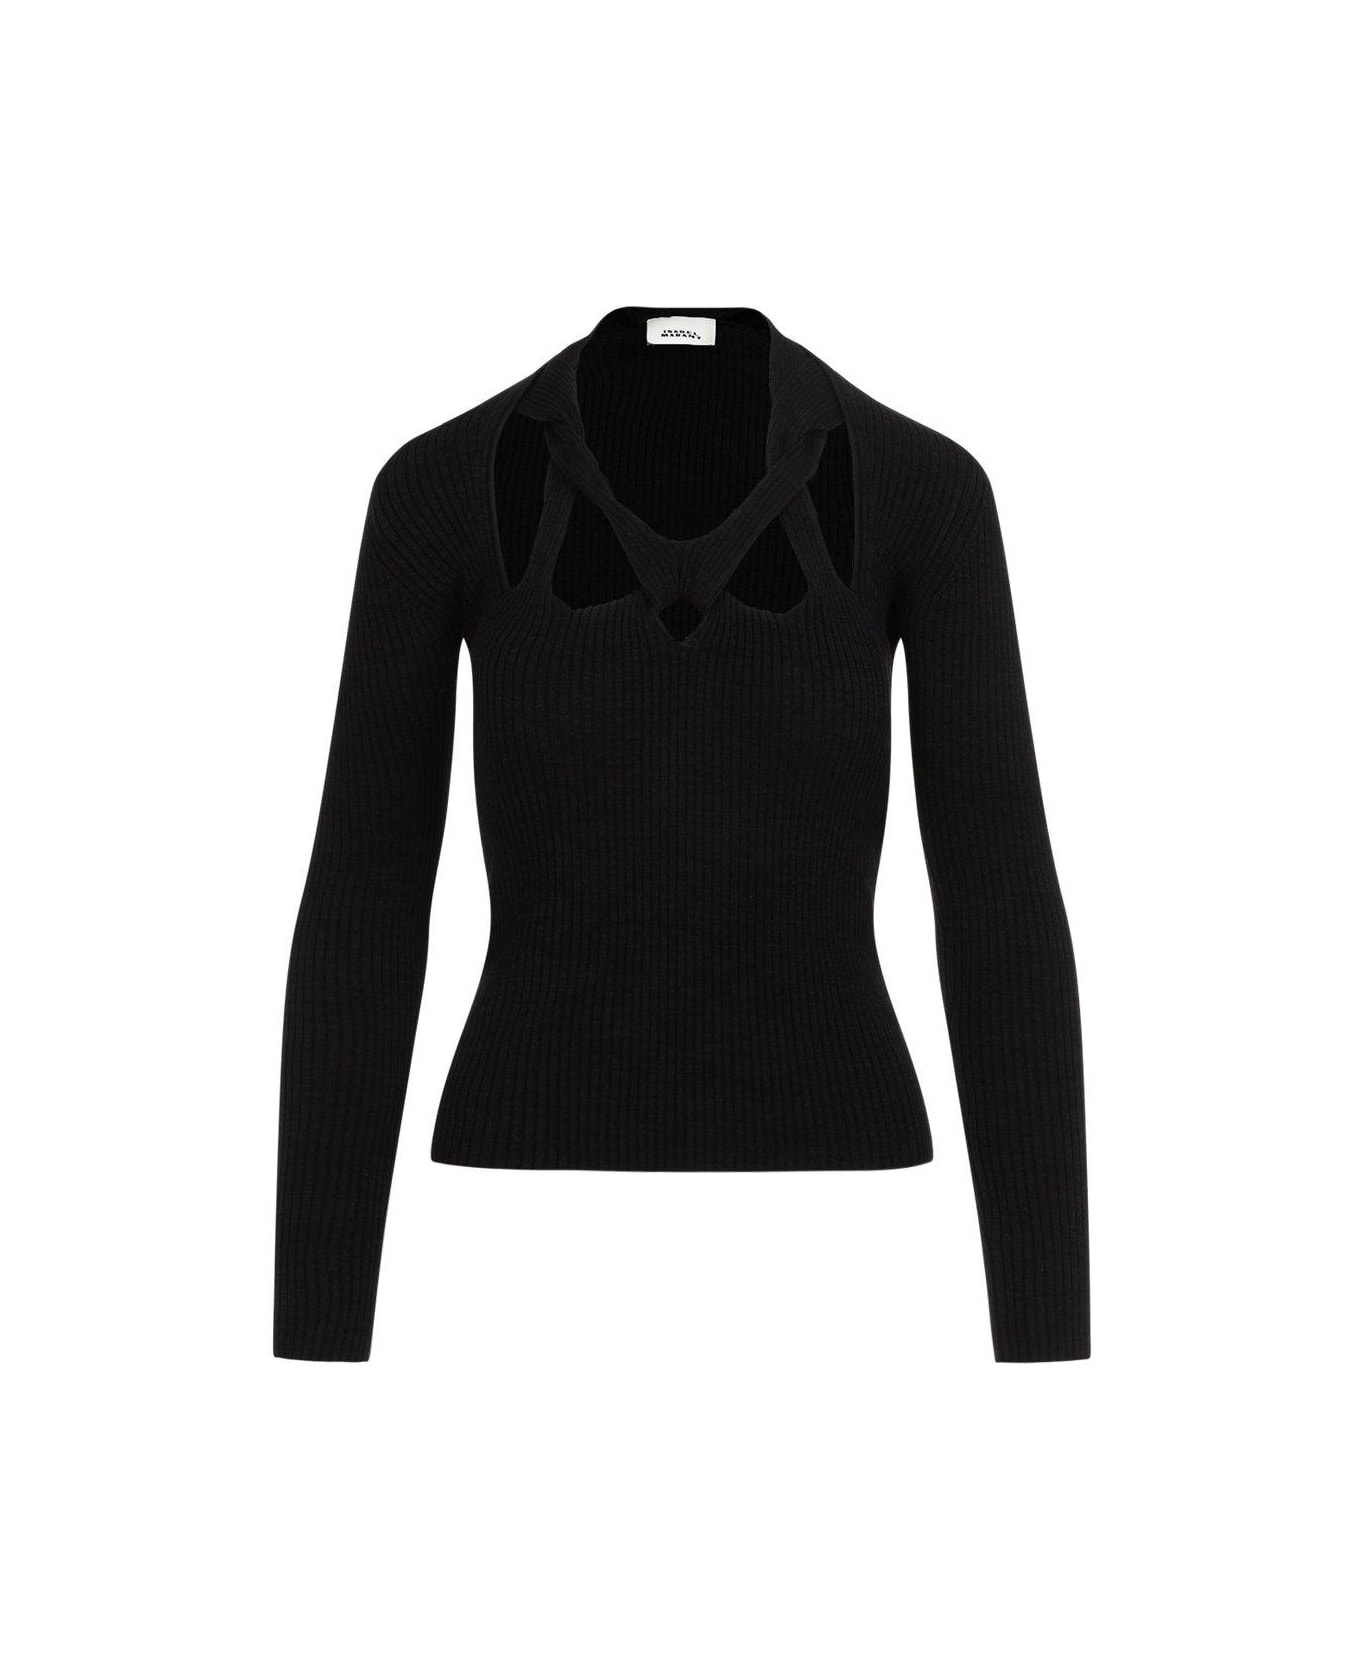 Isabel Marant Cut-out Detailed Knitted Jumper - Black